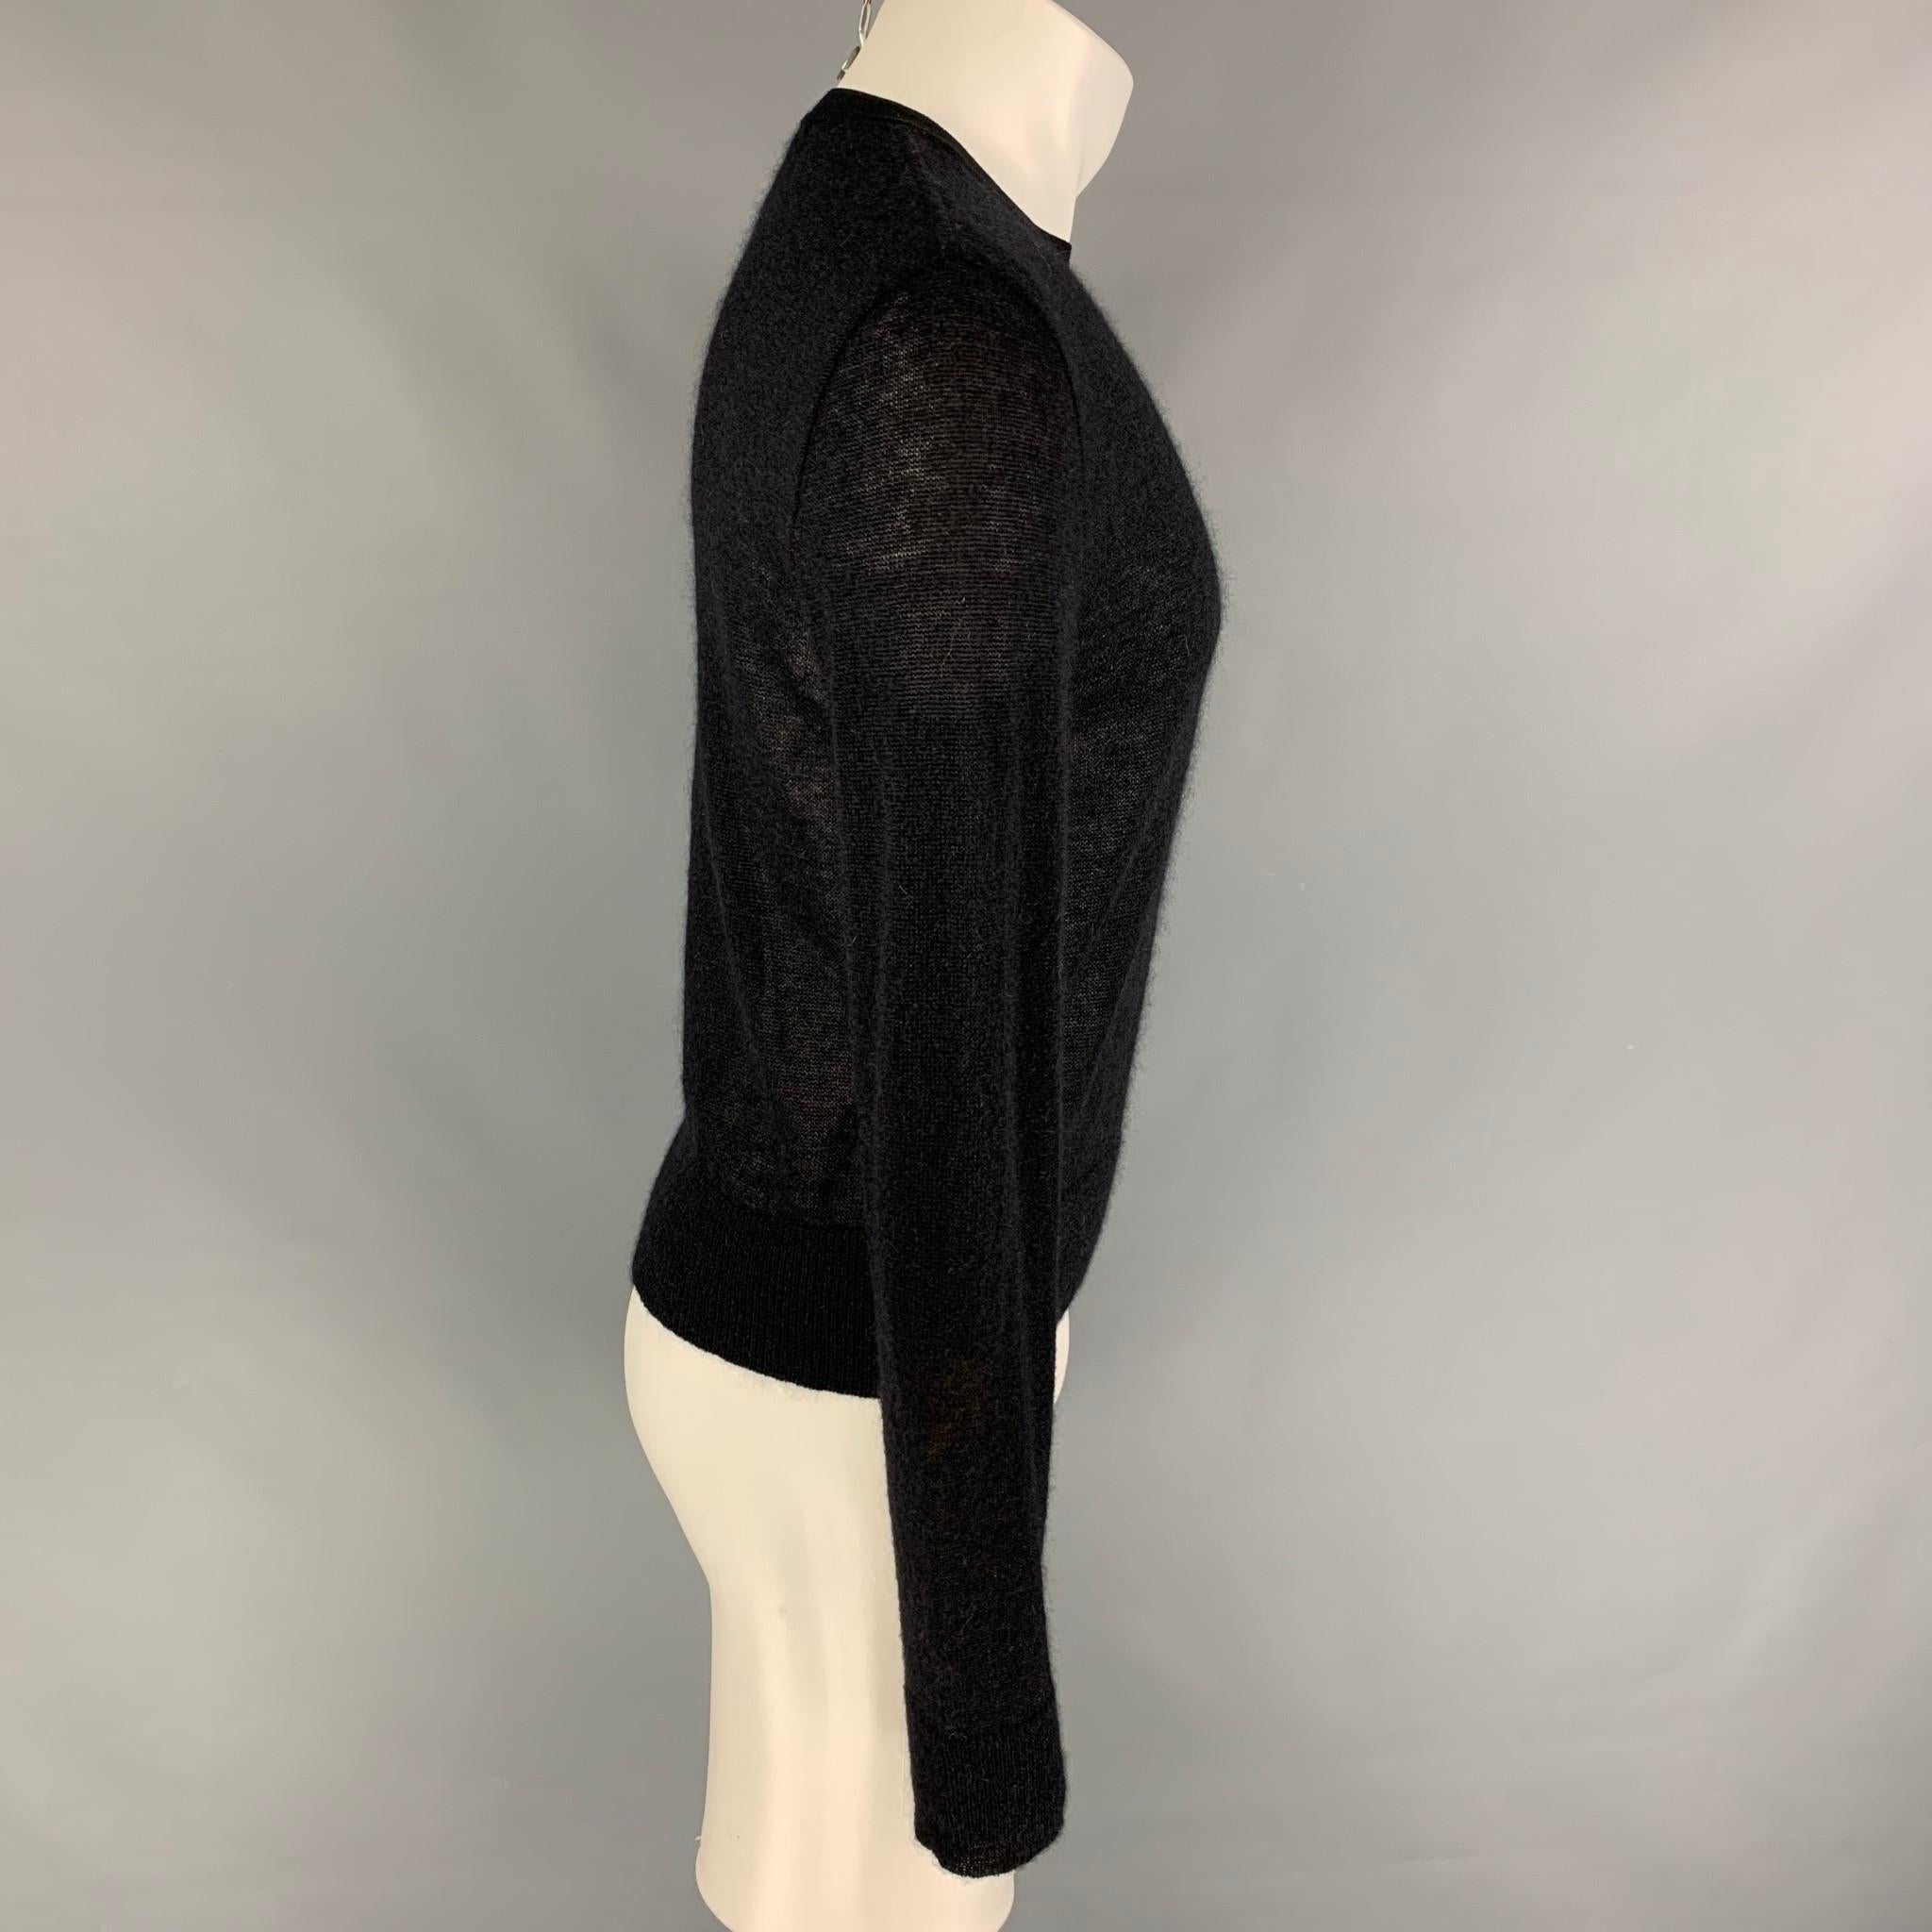 CALVIN KLEIN COLLECTION pullover comes in a black mohair blend featuring a crew-neck. Made in Italy. 

Very Good Pre-Owned Condition.
Marked: S

Measurements:

Shoulder: 17.5 in.
Chest: 38 in.
Sleeve: 29 in.
Length: 23 in. 